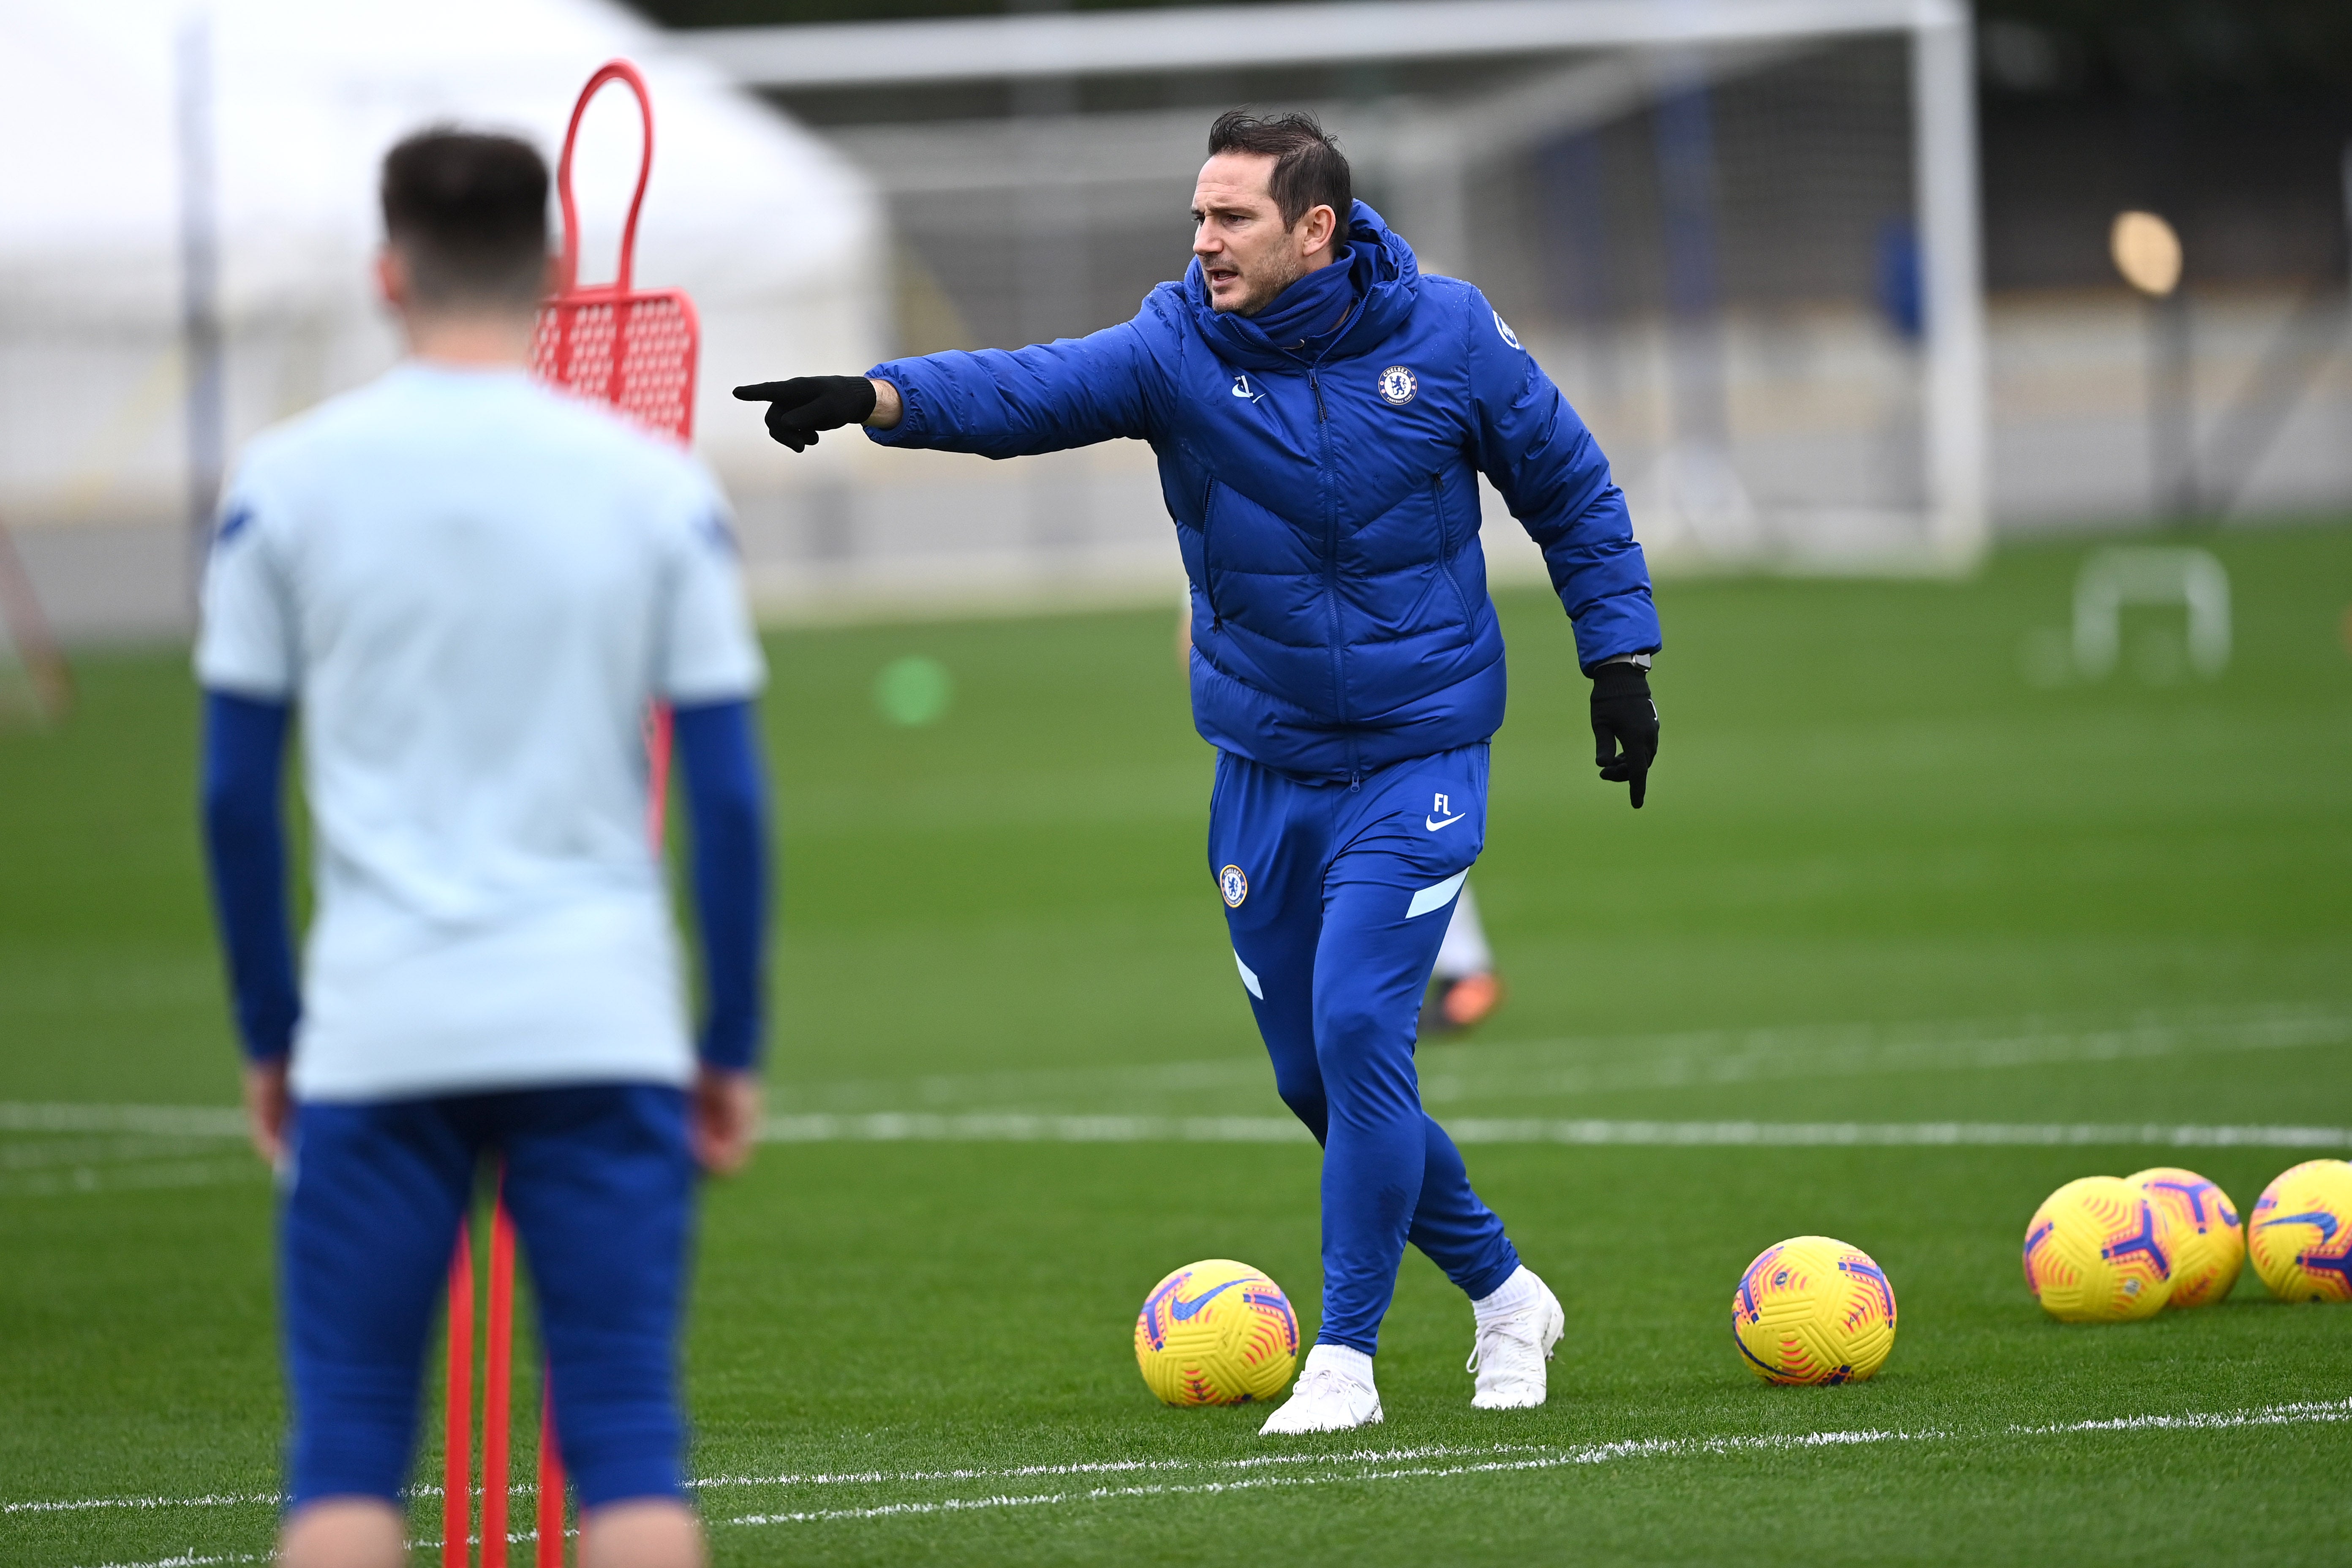 Frank Lampard fears the Premier League schedule this year is ‘unfair’ and ‘compromises’ player wellfare